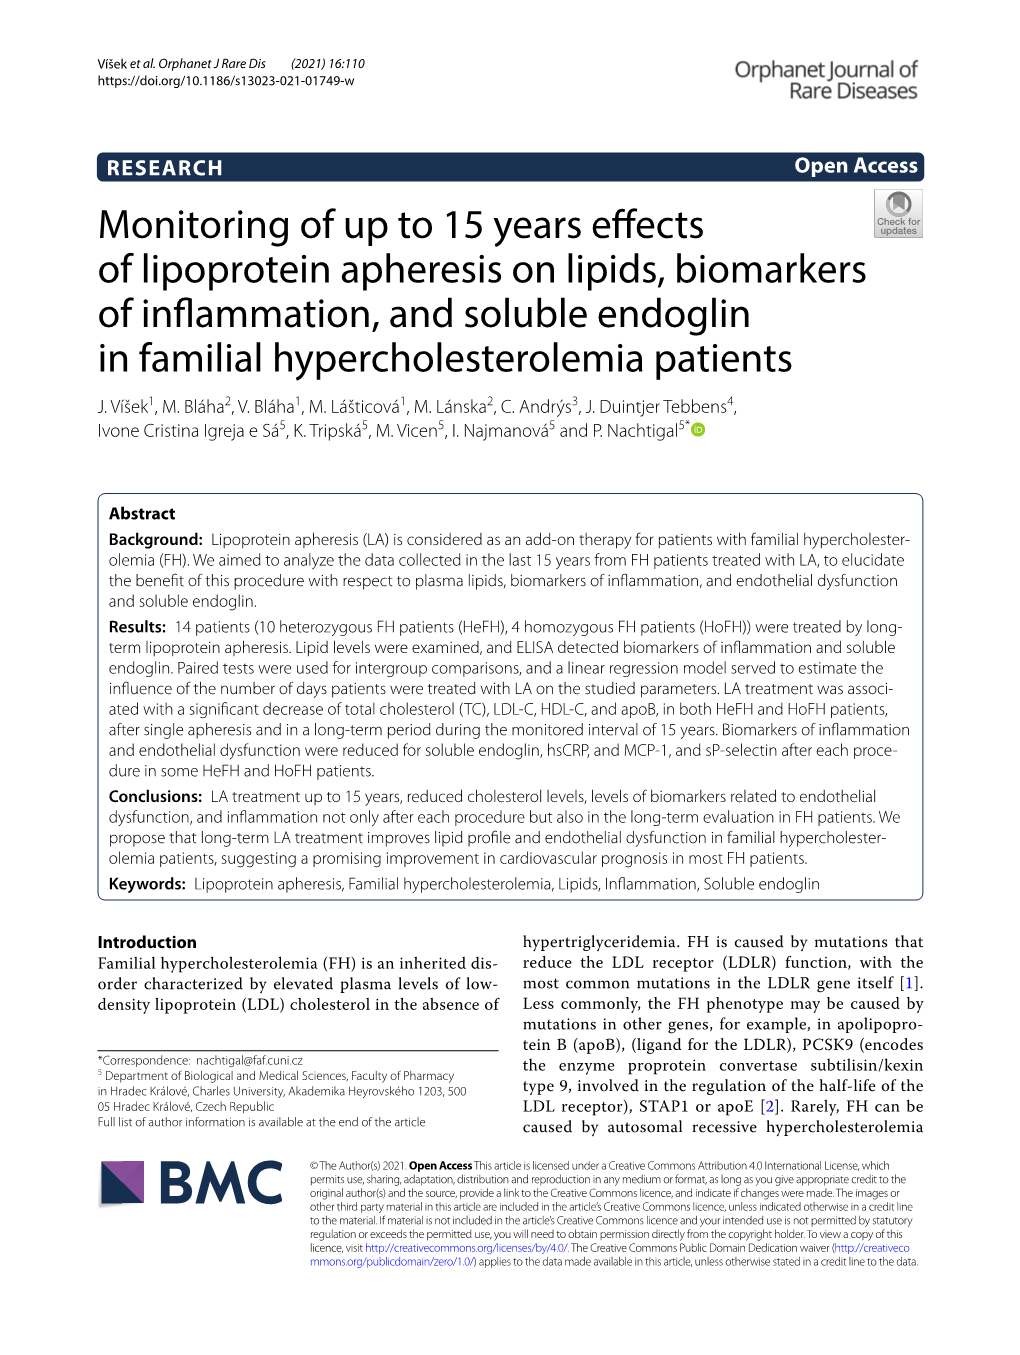 Monitoring of up to 15 Years Effects of Lipoprotein Apheresis on Lipids